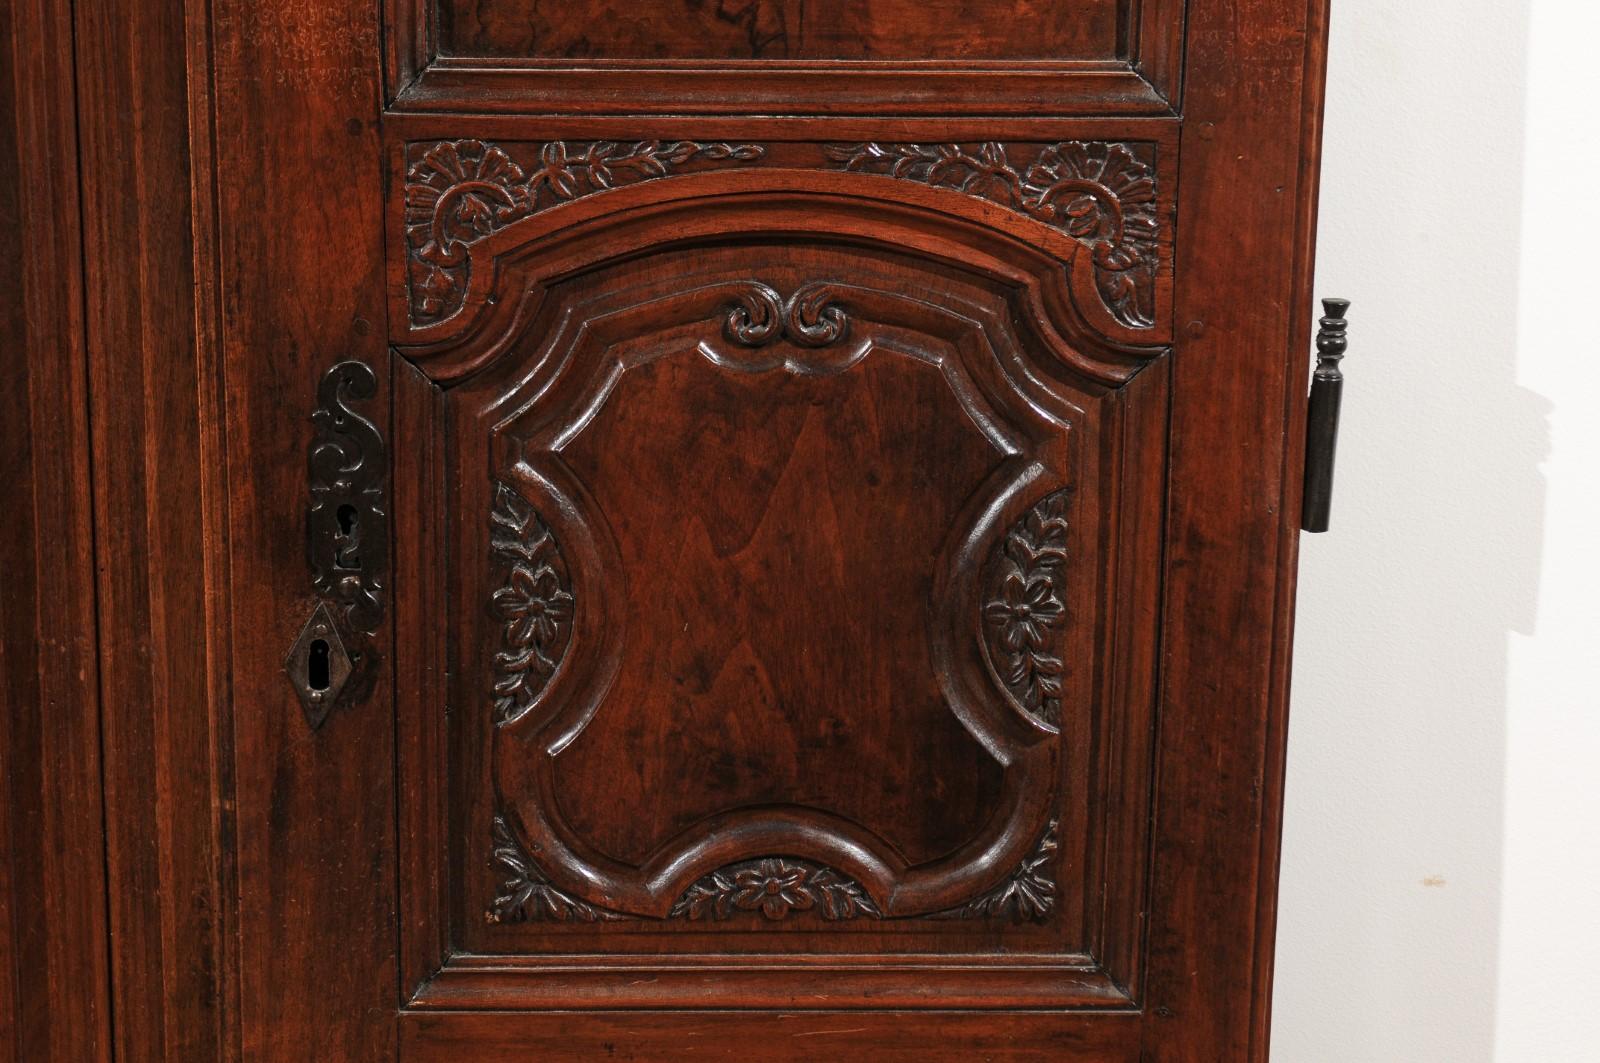 Hand-Carved Pair of French Walnut Hand Carved Wooden Doors with Foliage Motifs, circa 1750